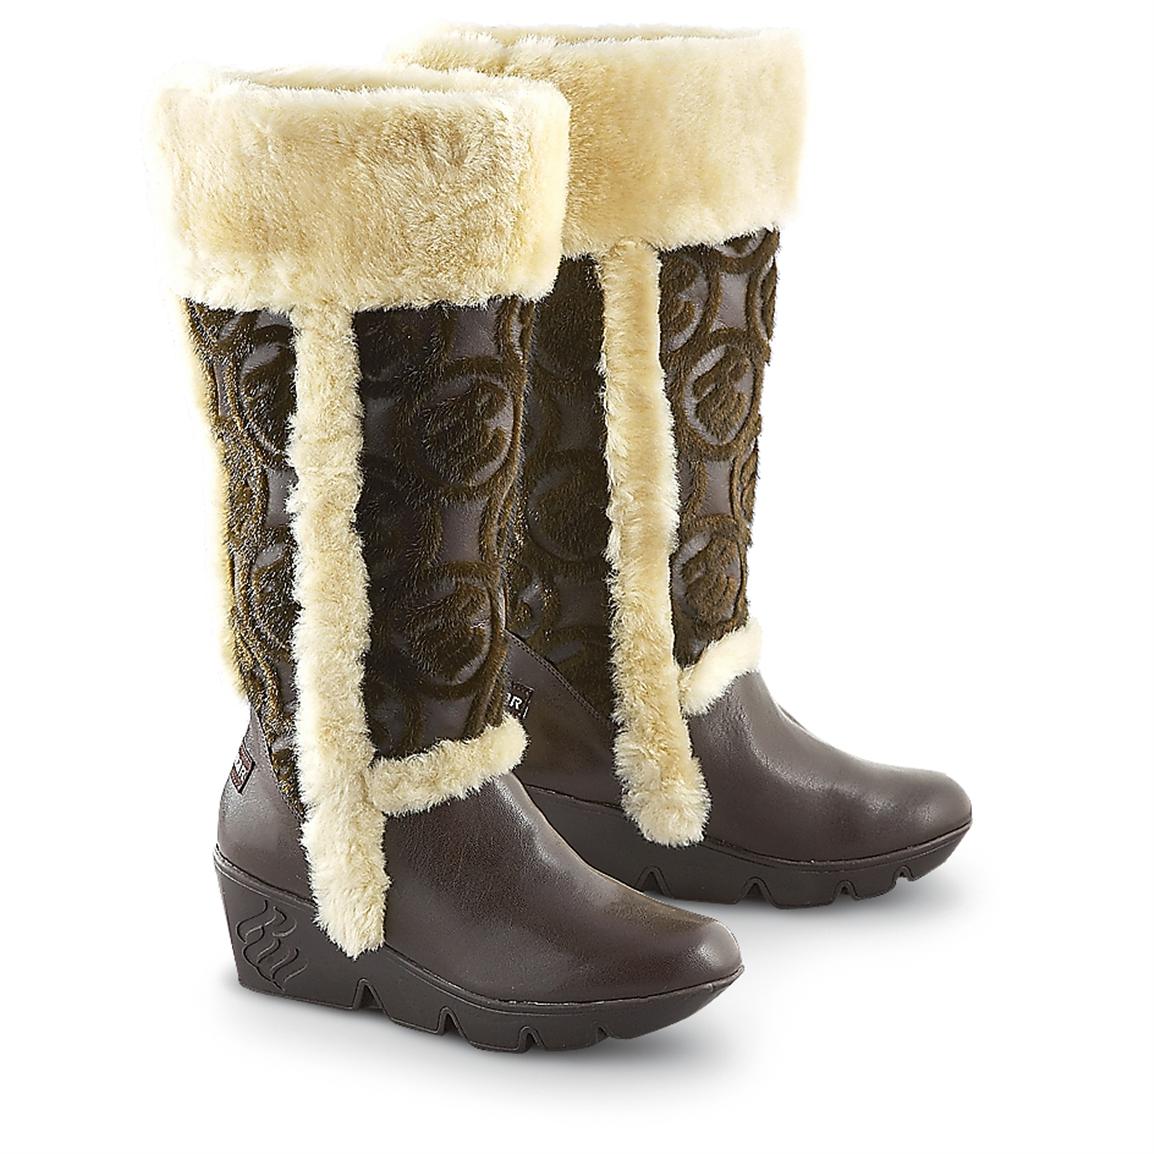 rocawear boots with fur